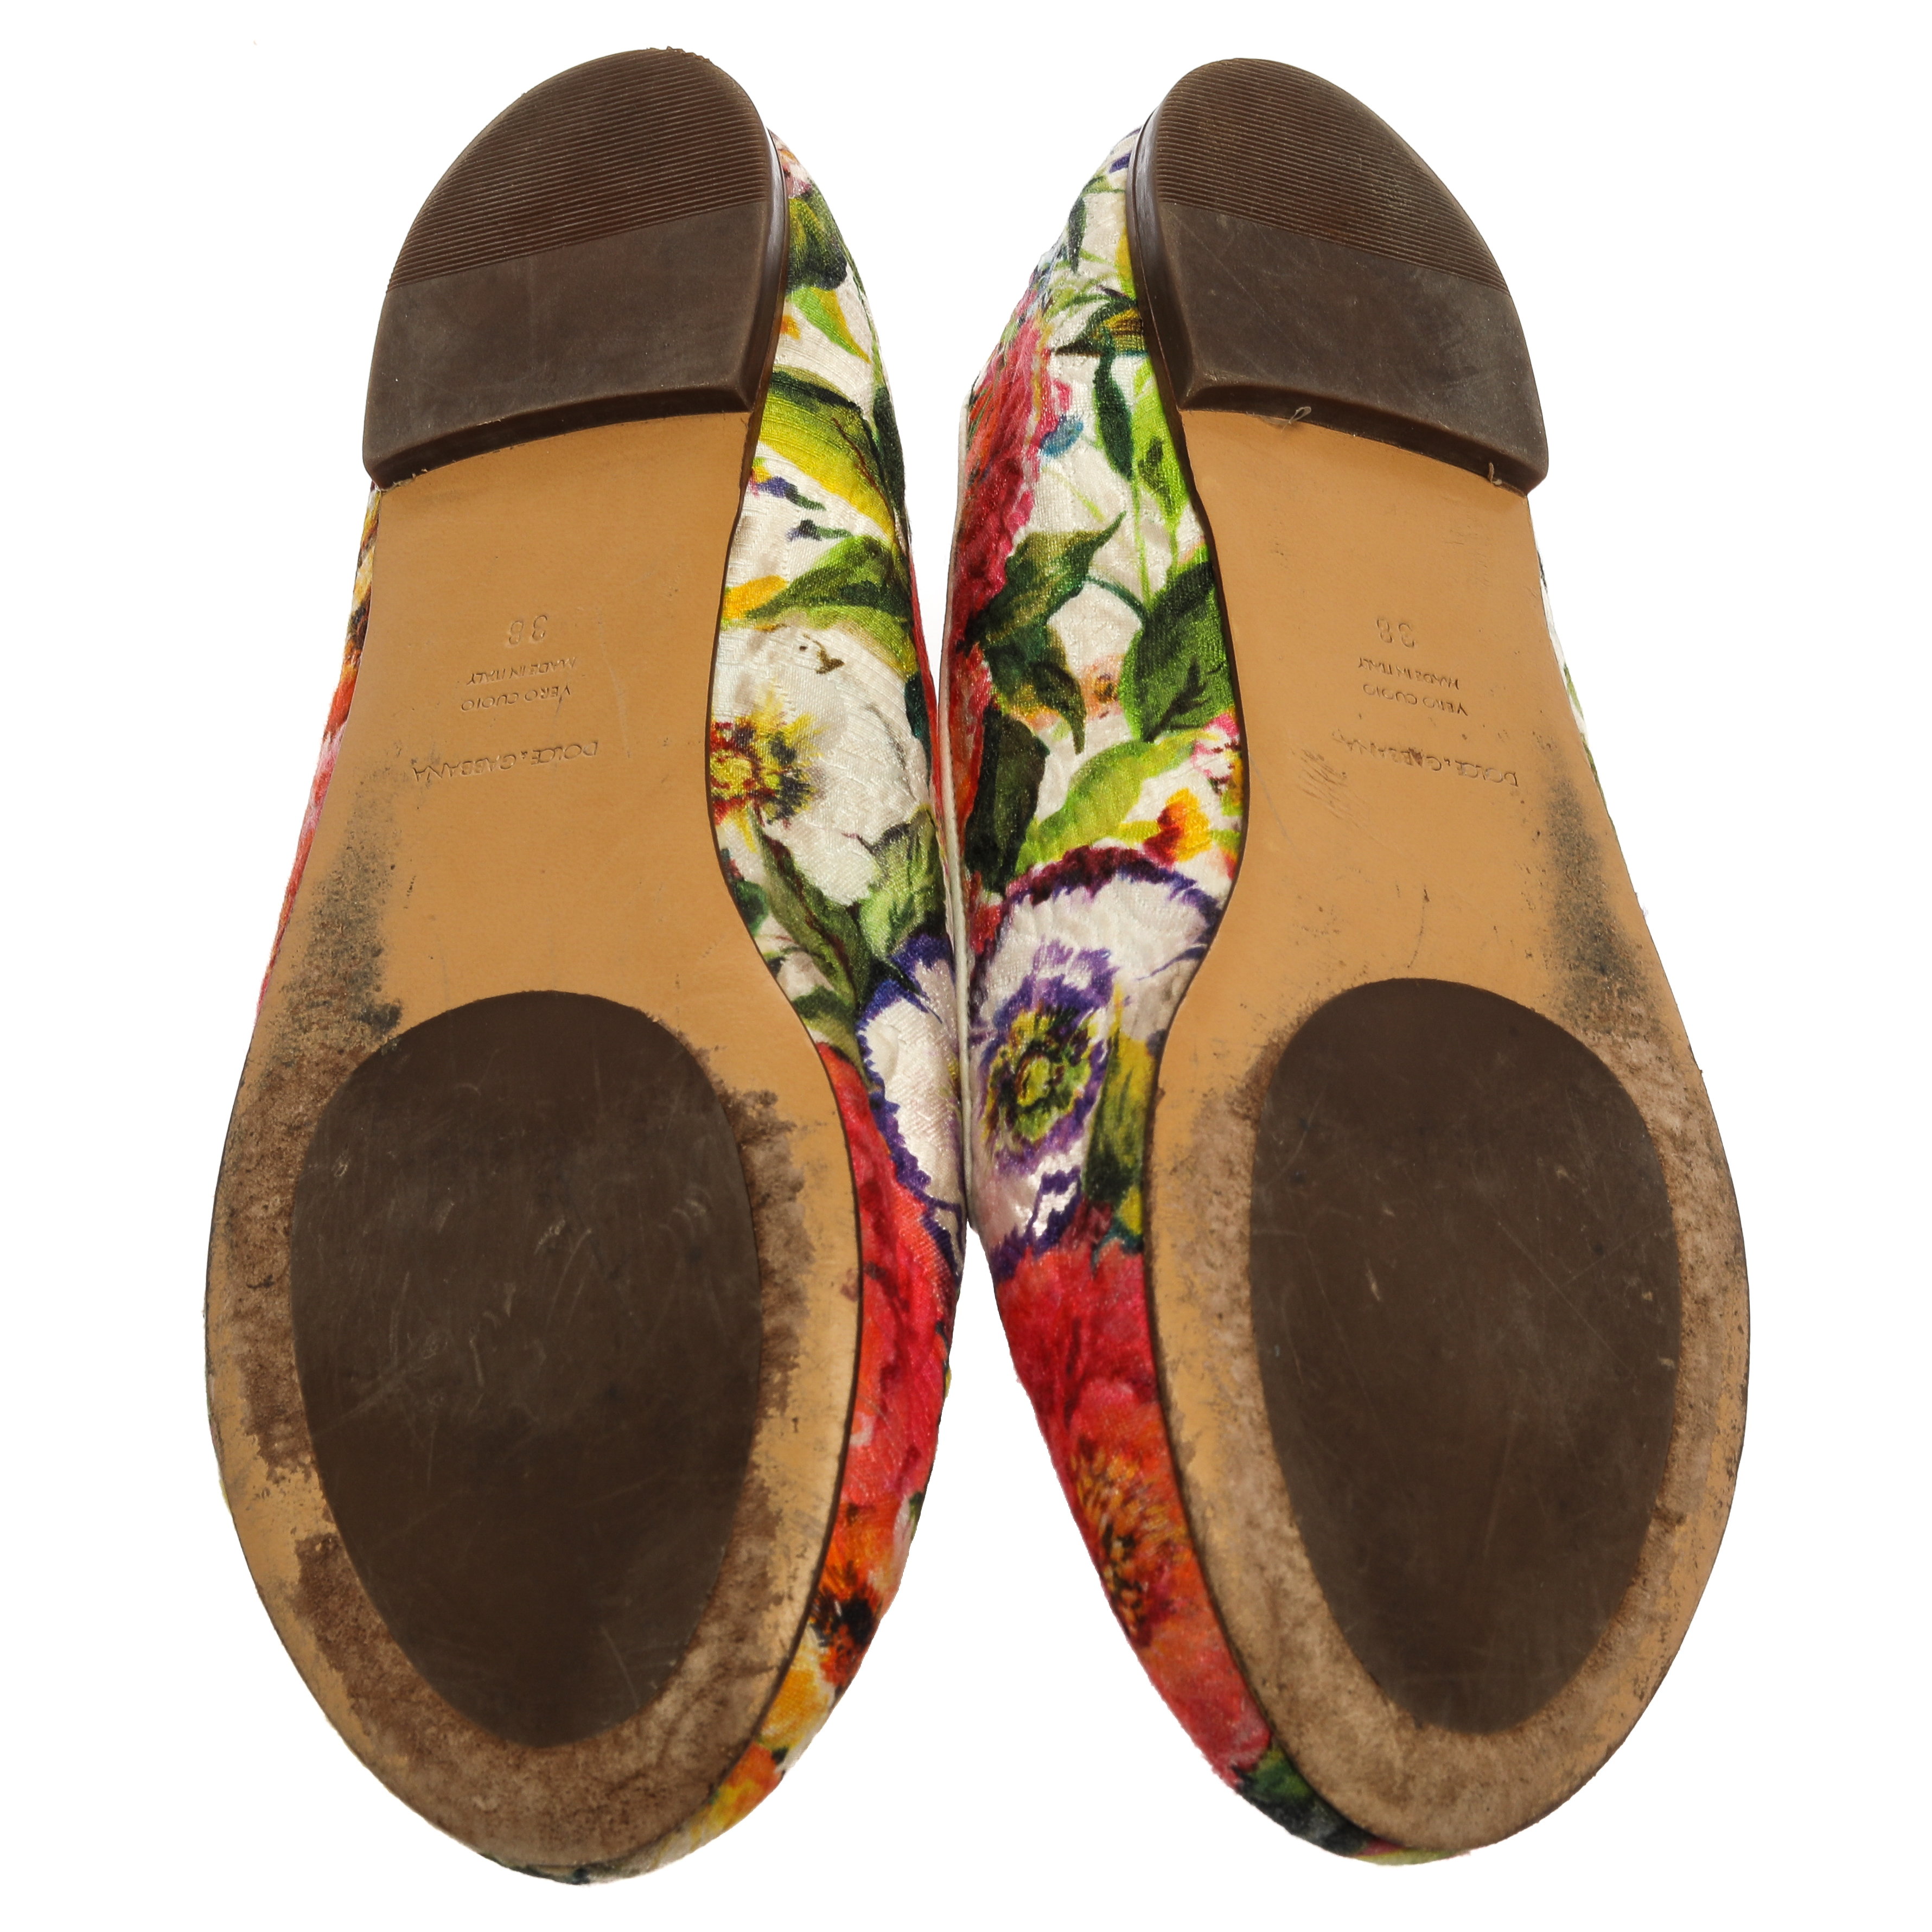 Dolce & Gabbana Multicolor Floral Print Brocade Flat Smoking Slippers Size 38